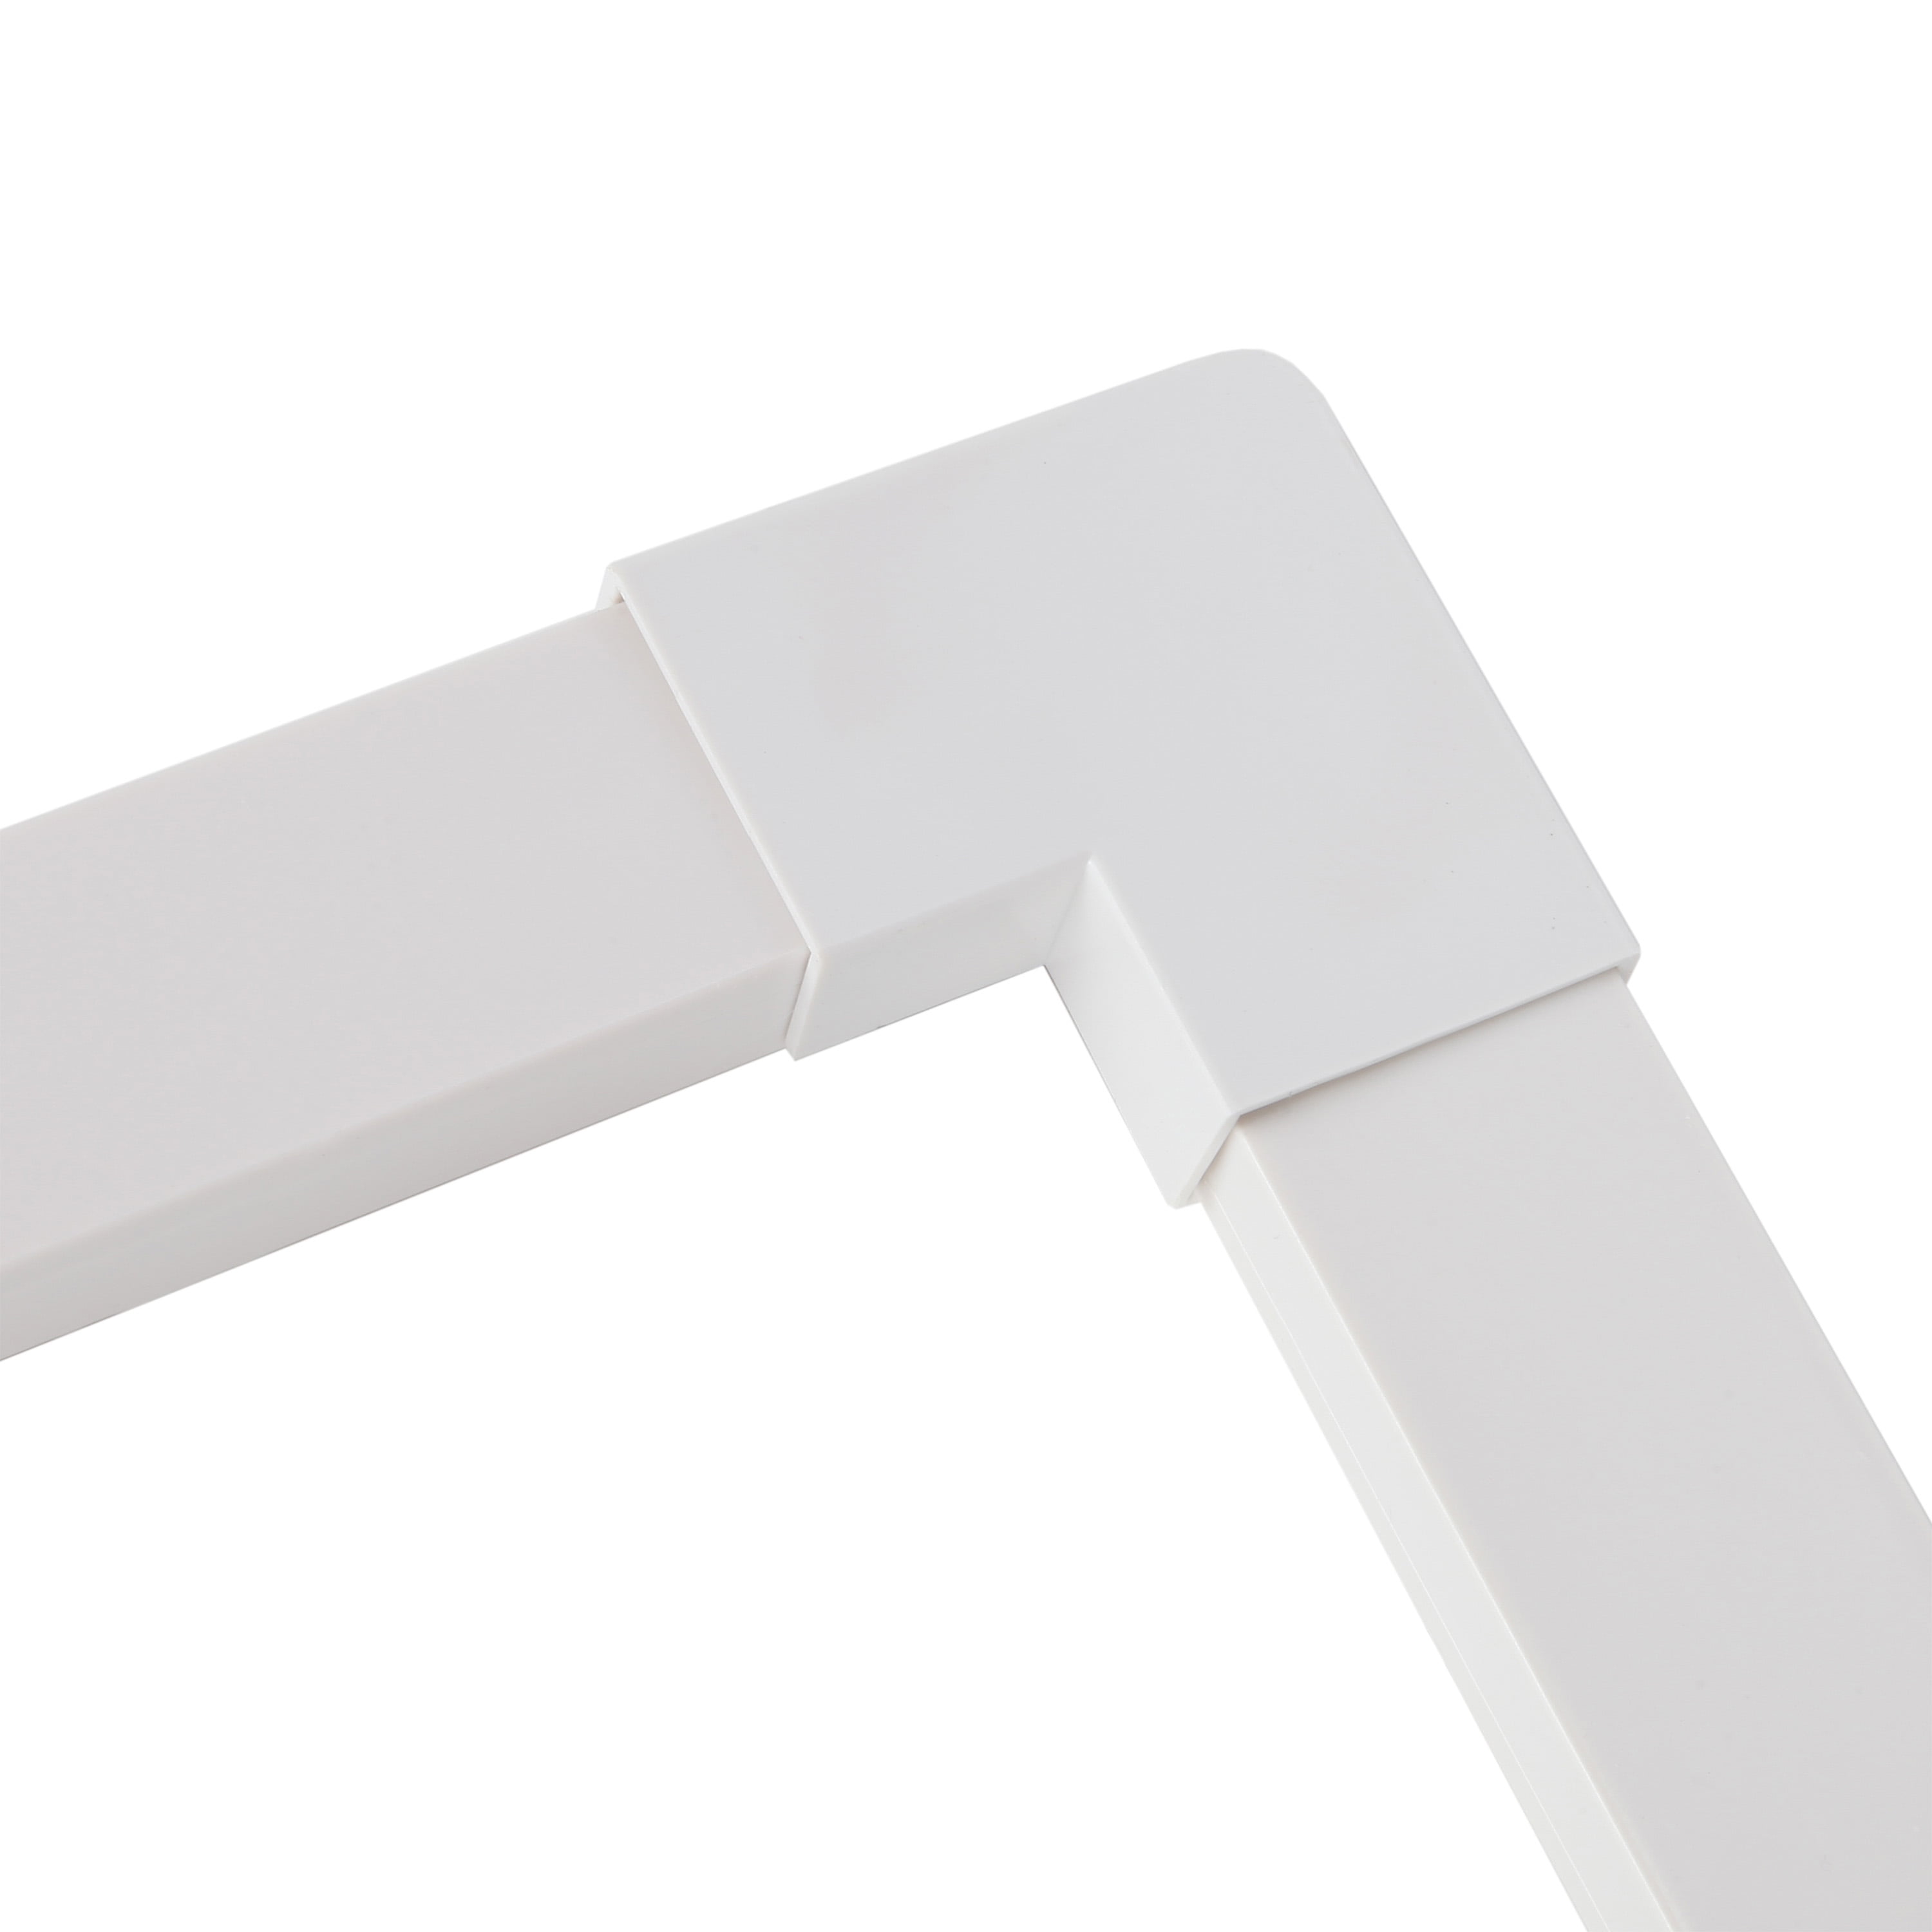 HomeConcept CC111WH Corner Cord Cover 20 White (2 Pack)